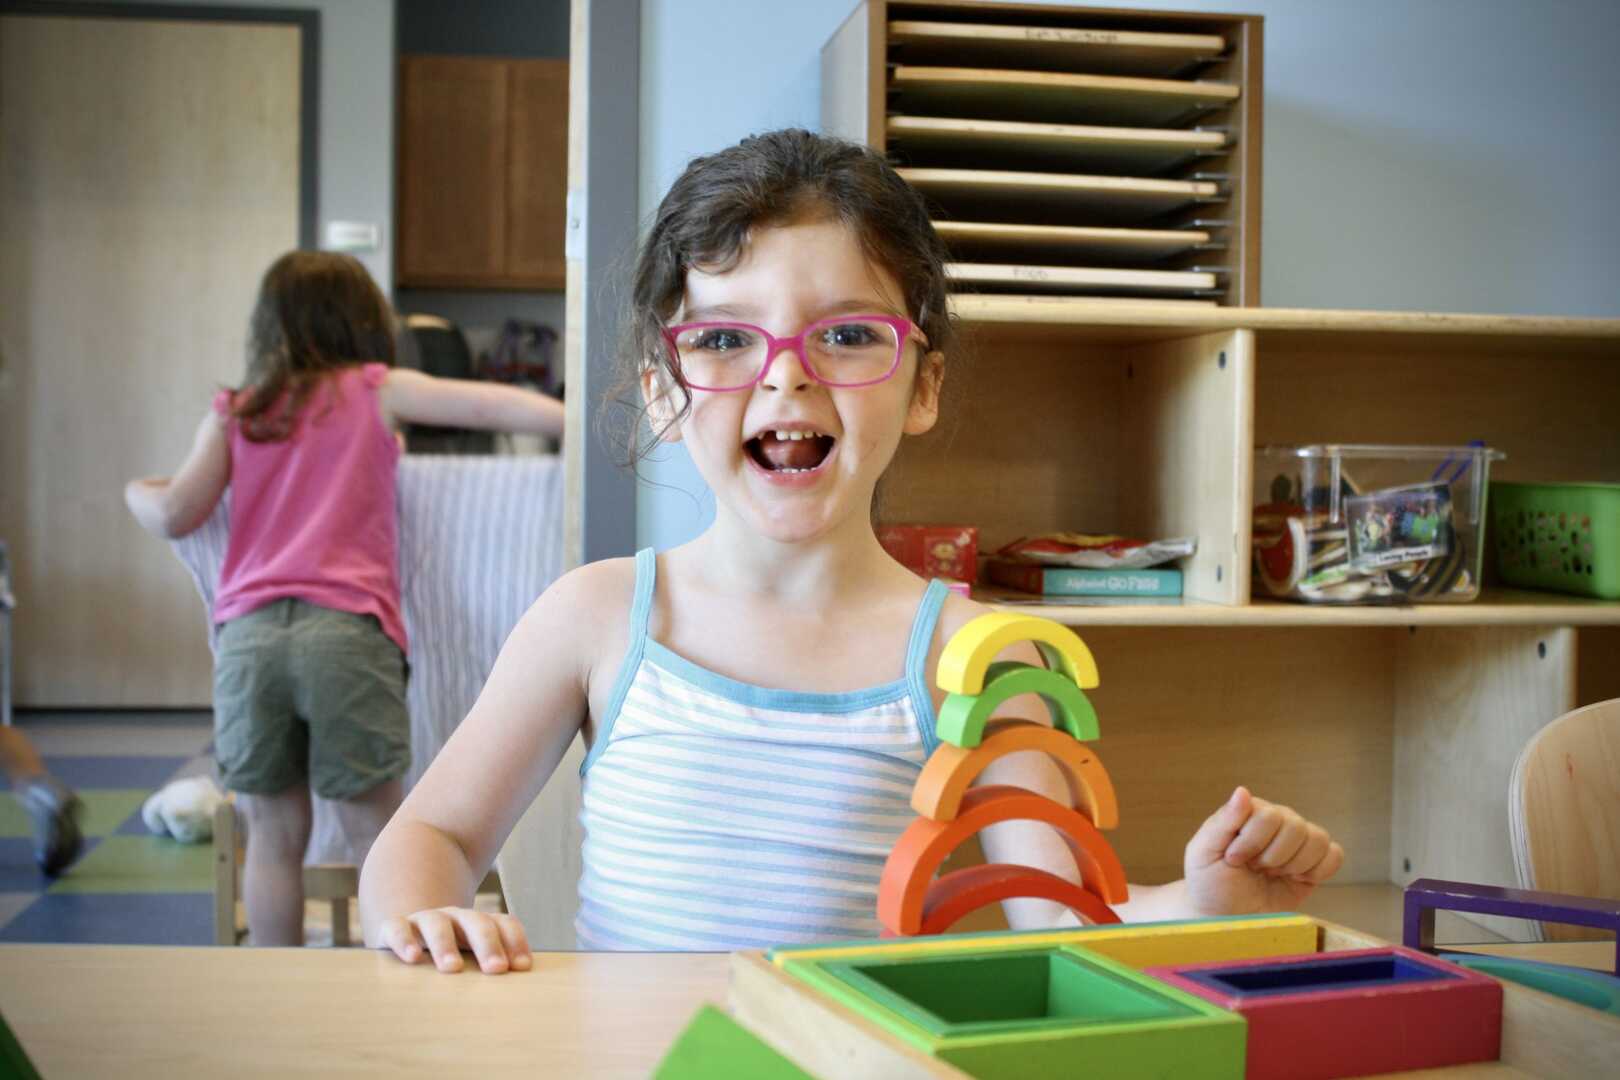 A young girl smilies after stacking arched colorful blocks on top of each other.